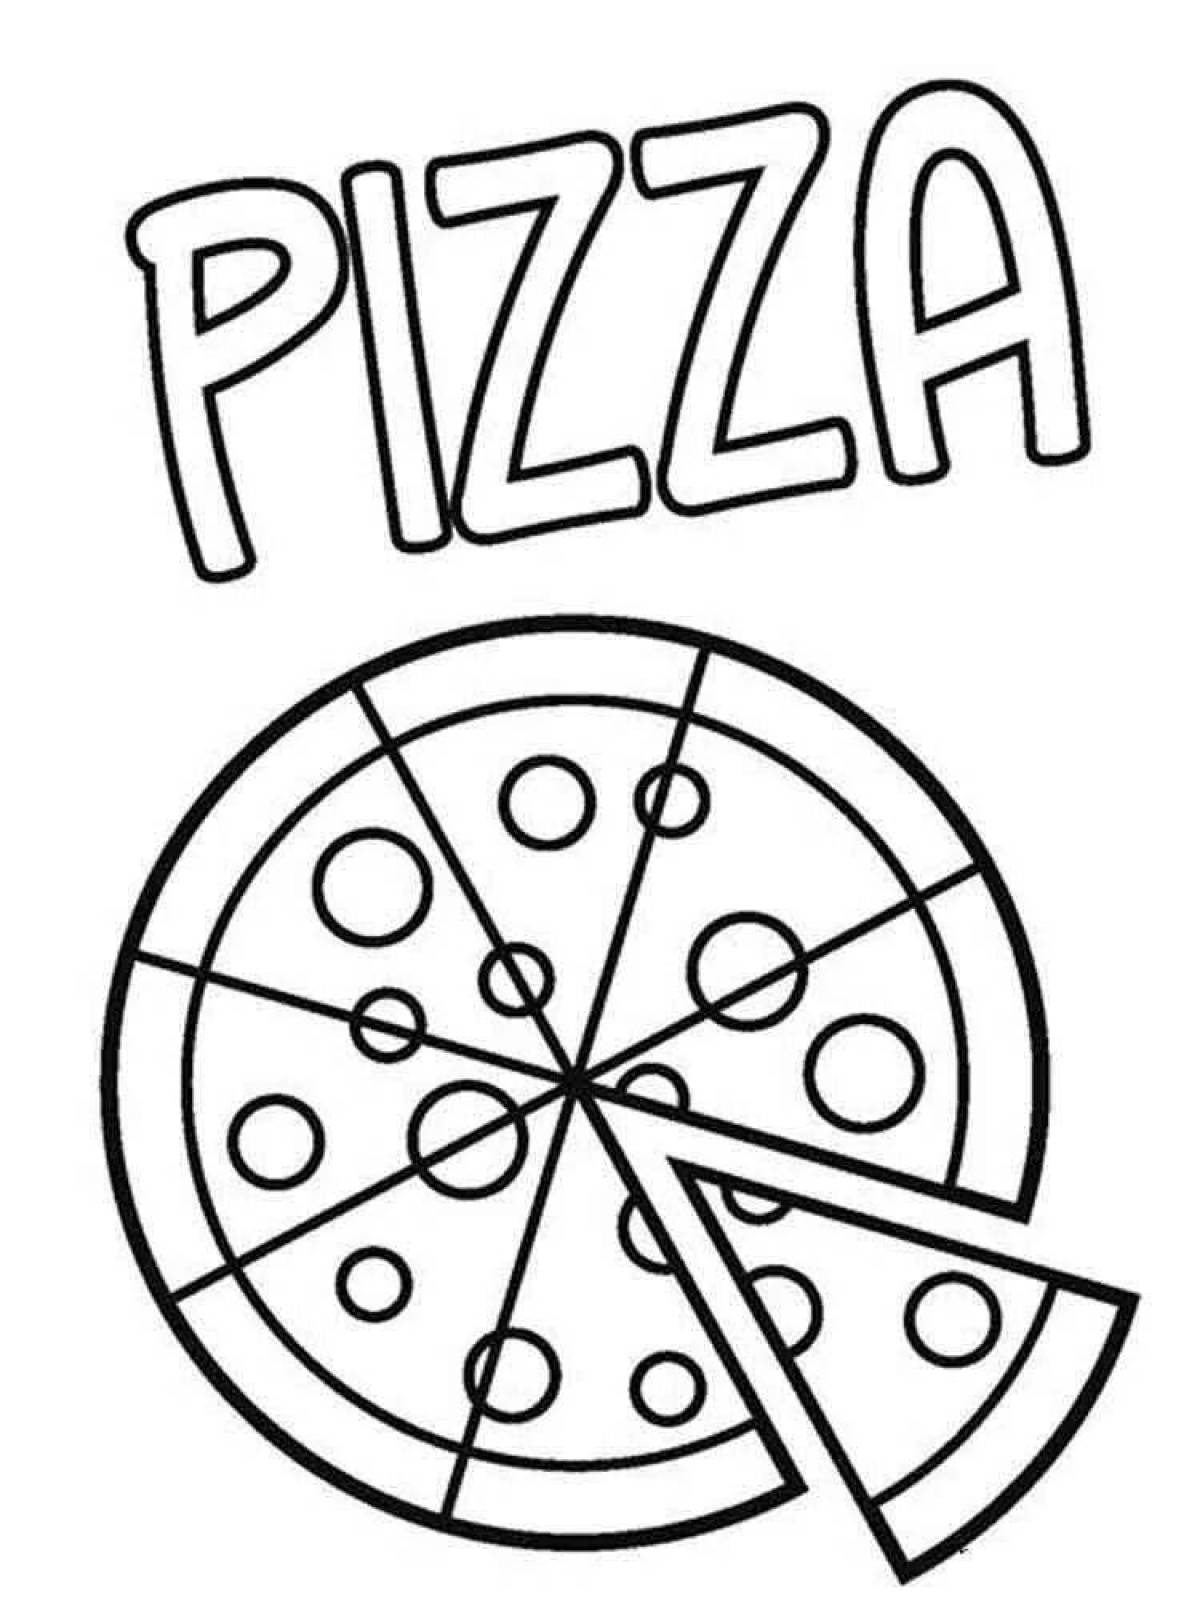 Coloring page beautiful pizzeria